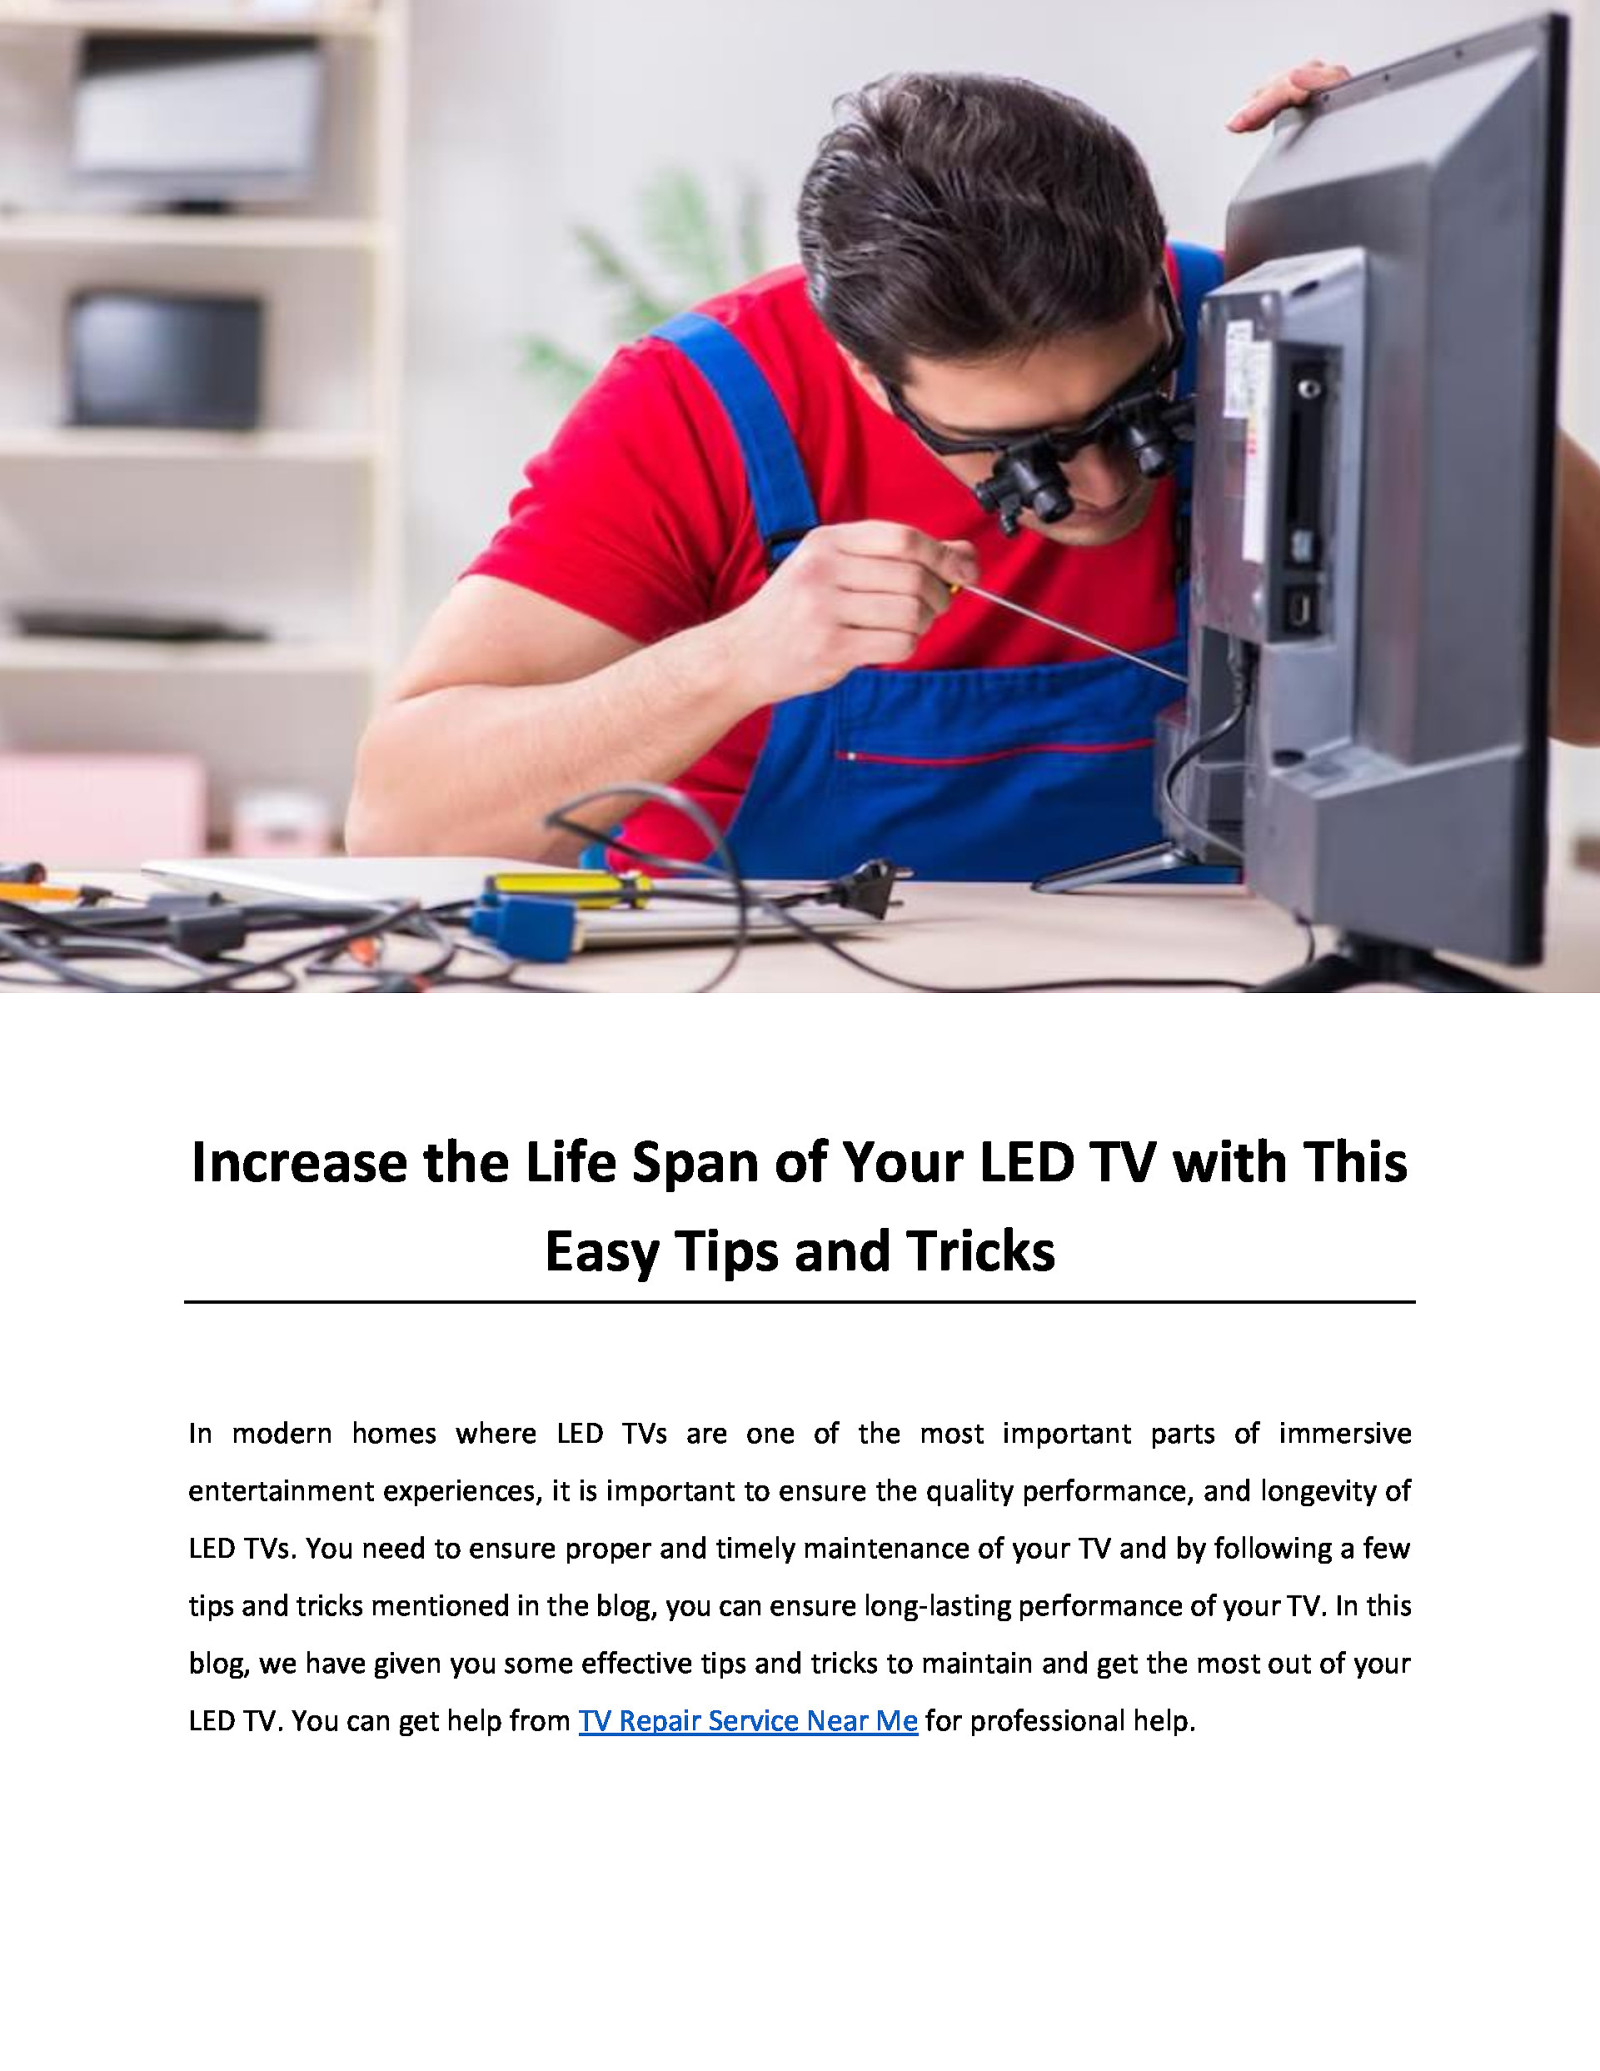 Increase the Life Span of Your LED TV with This Easy Tips and Tricks